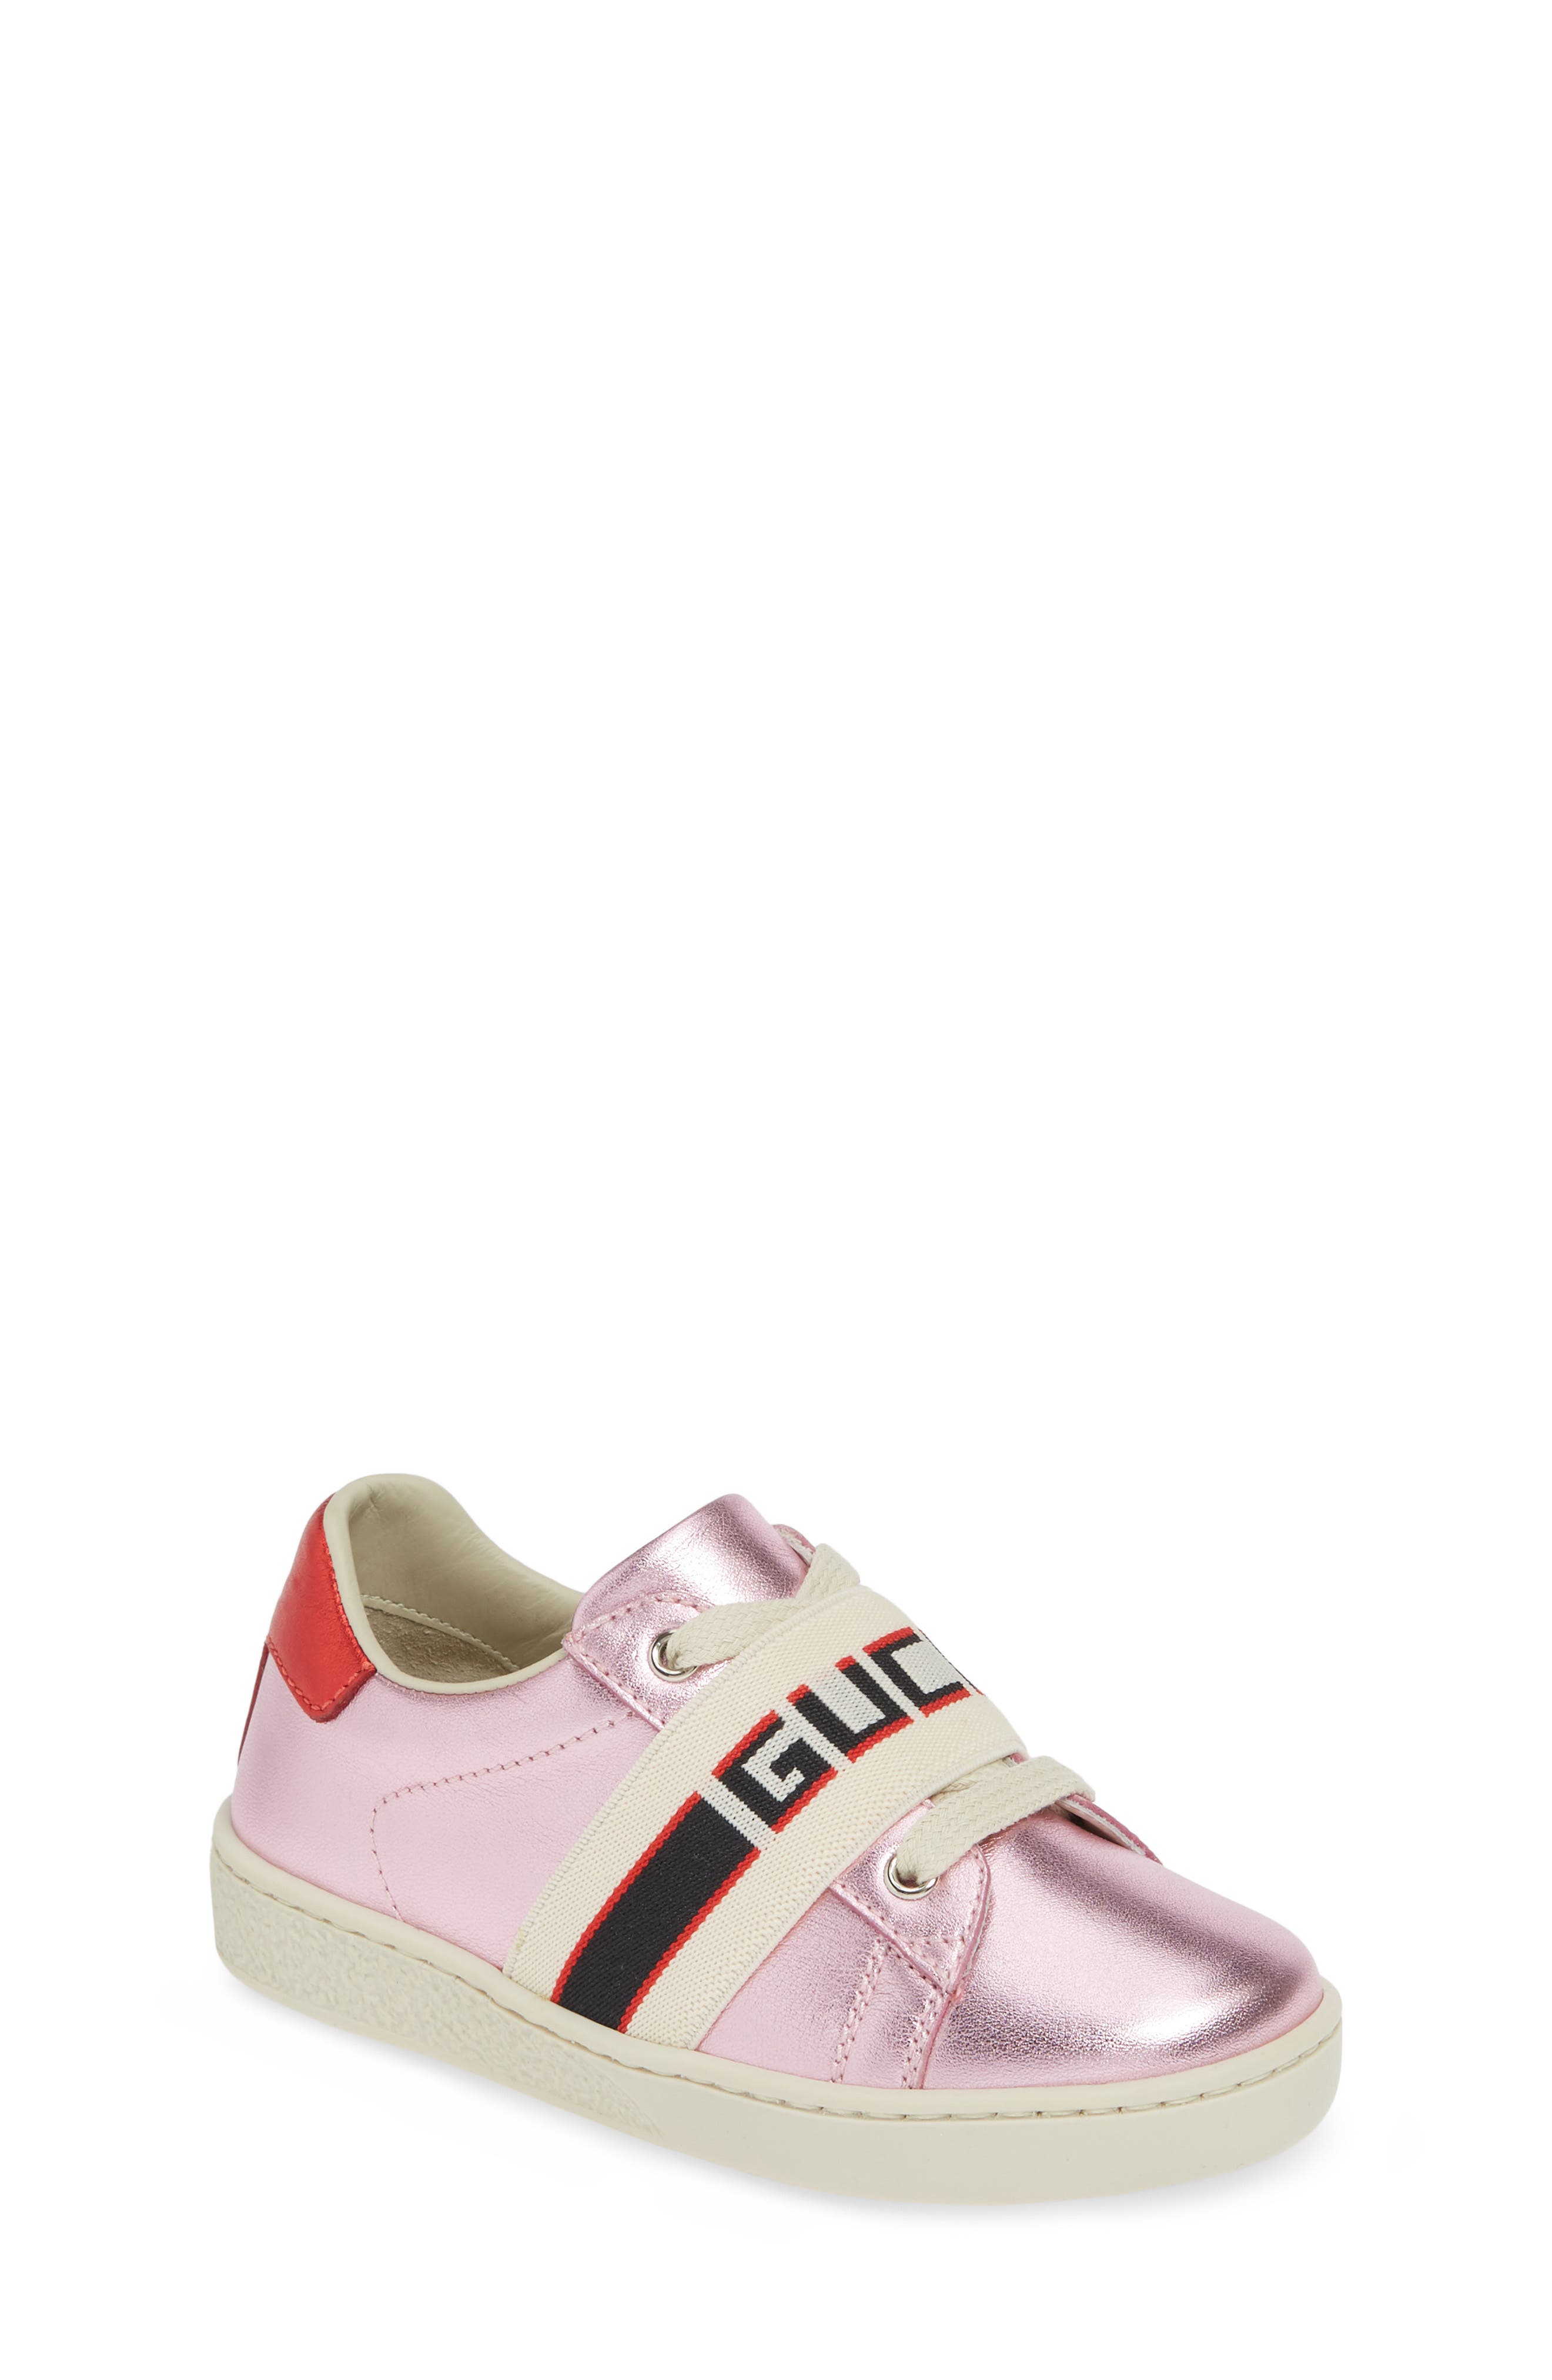 gucci shoes for girls